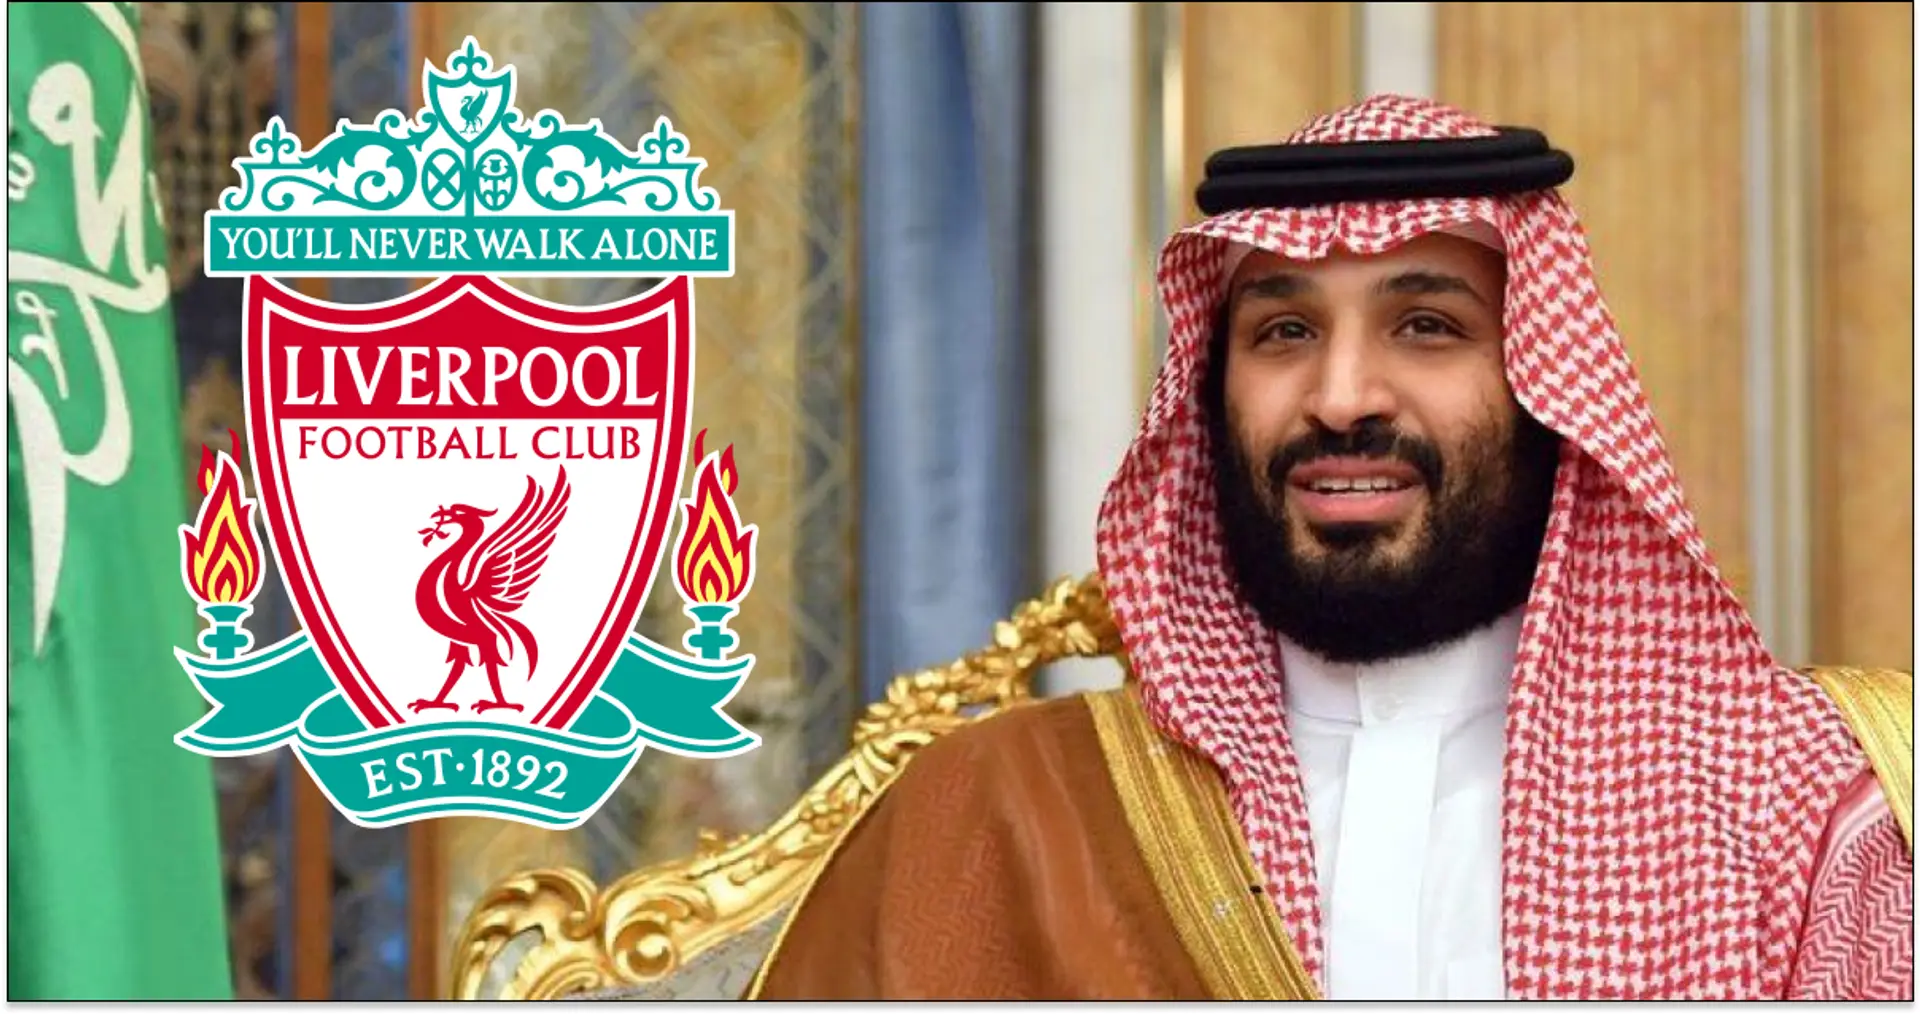 Dubai investors considering $5bn Liverpool bid & 3 other big stories you could have missed